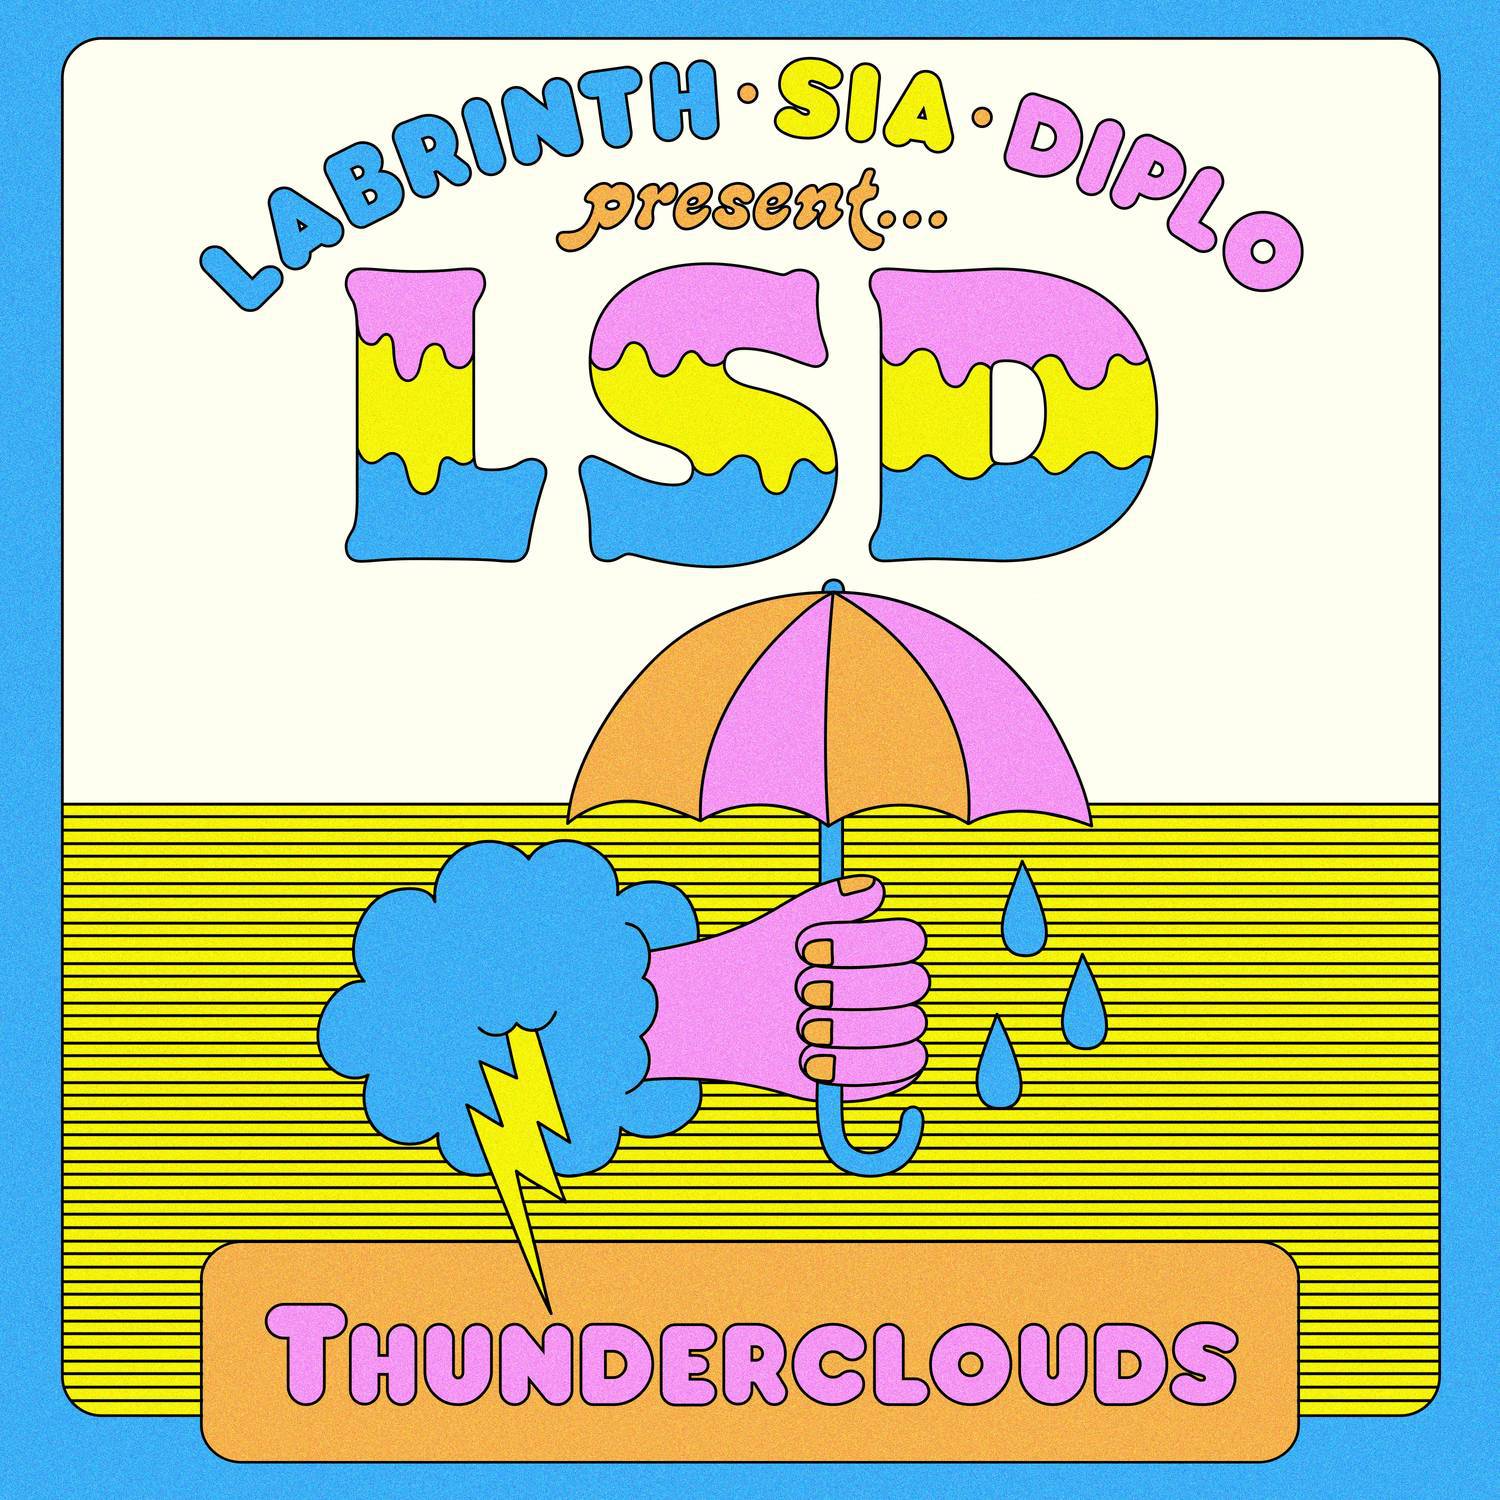 LSD - Thunderclouds (Ft. Sia, Diplo, Labrinth) 三人组合